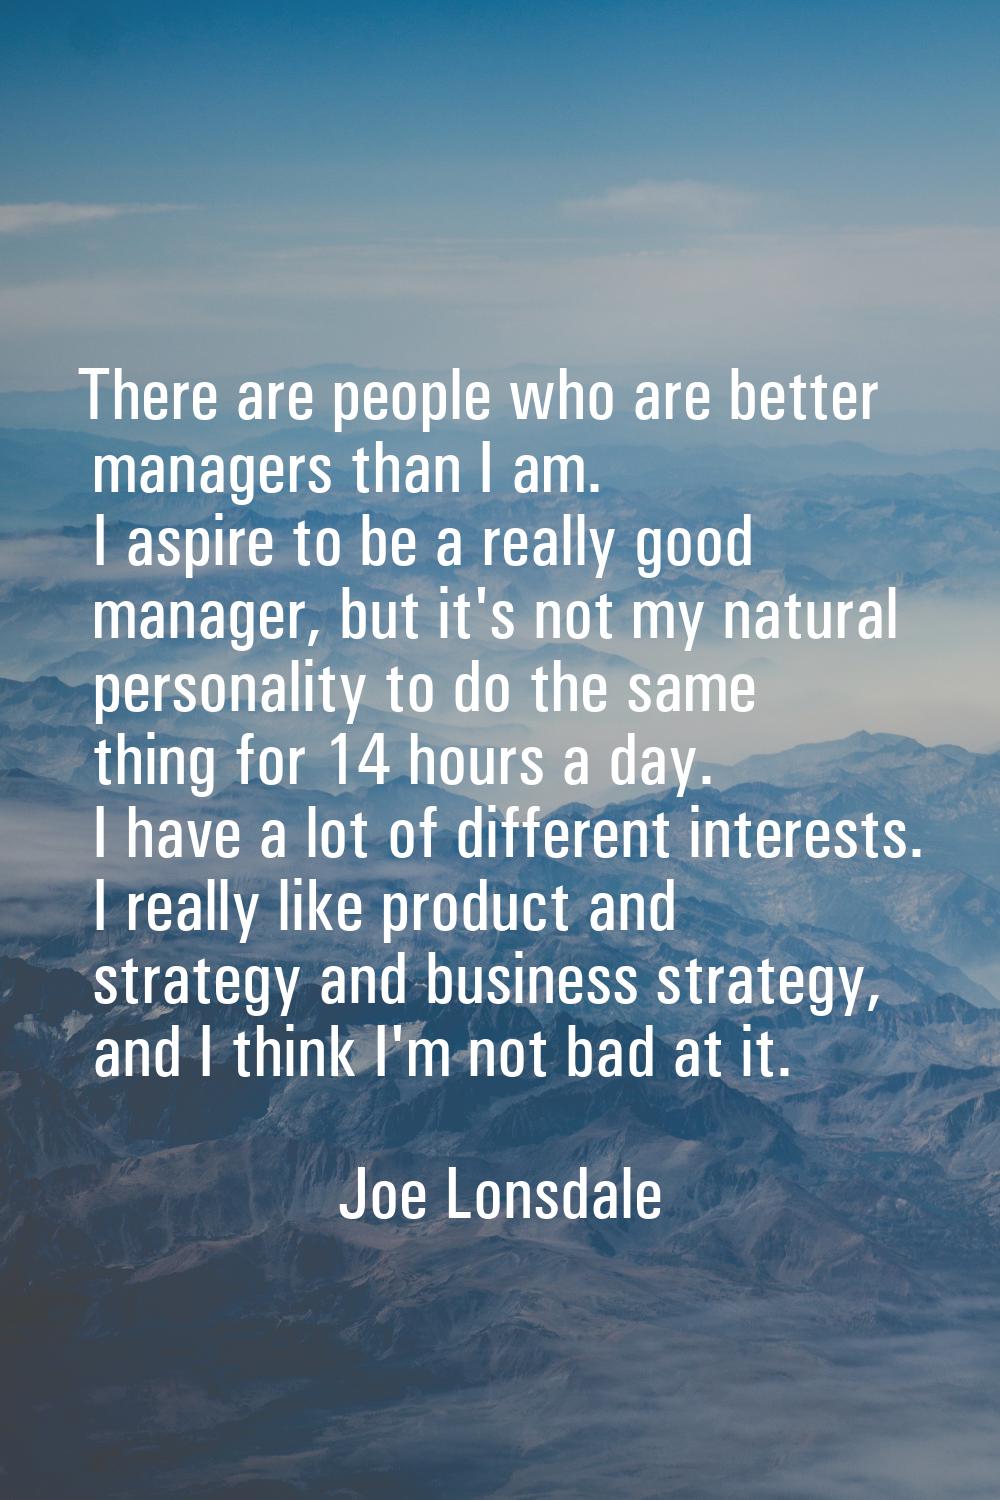 There are people who are better managers than I am. I aspire to be a really good manager, but it's 